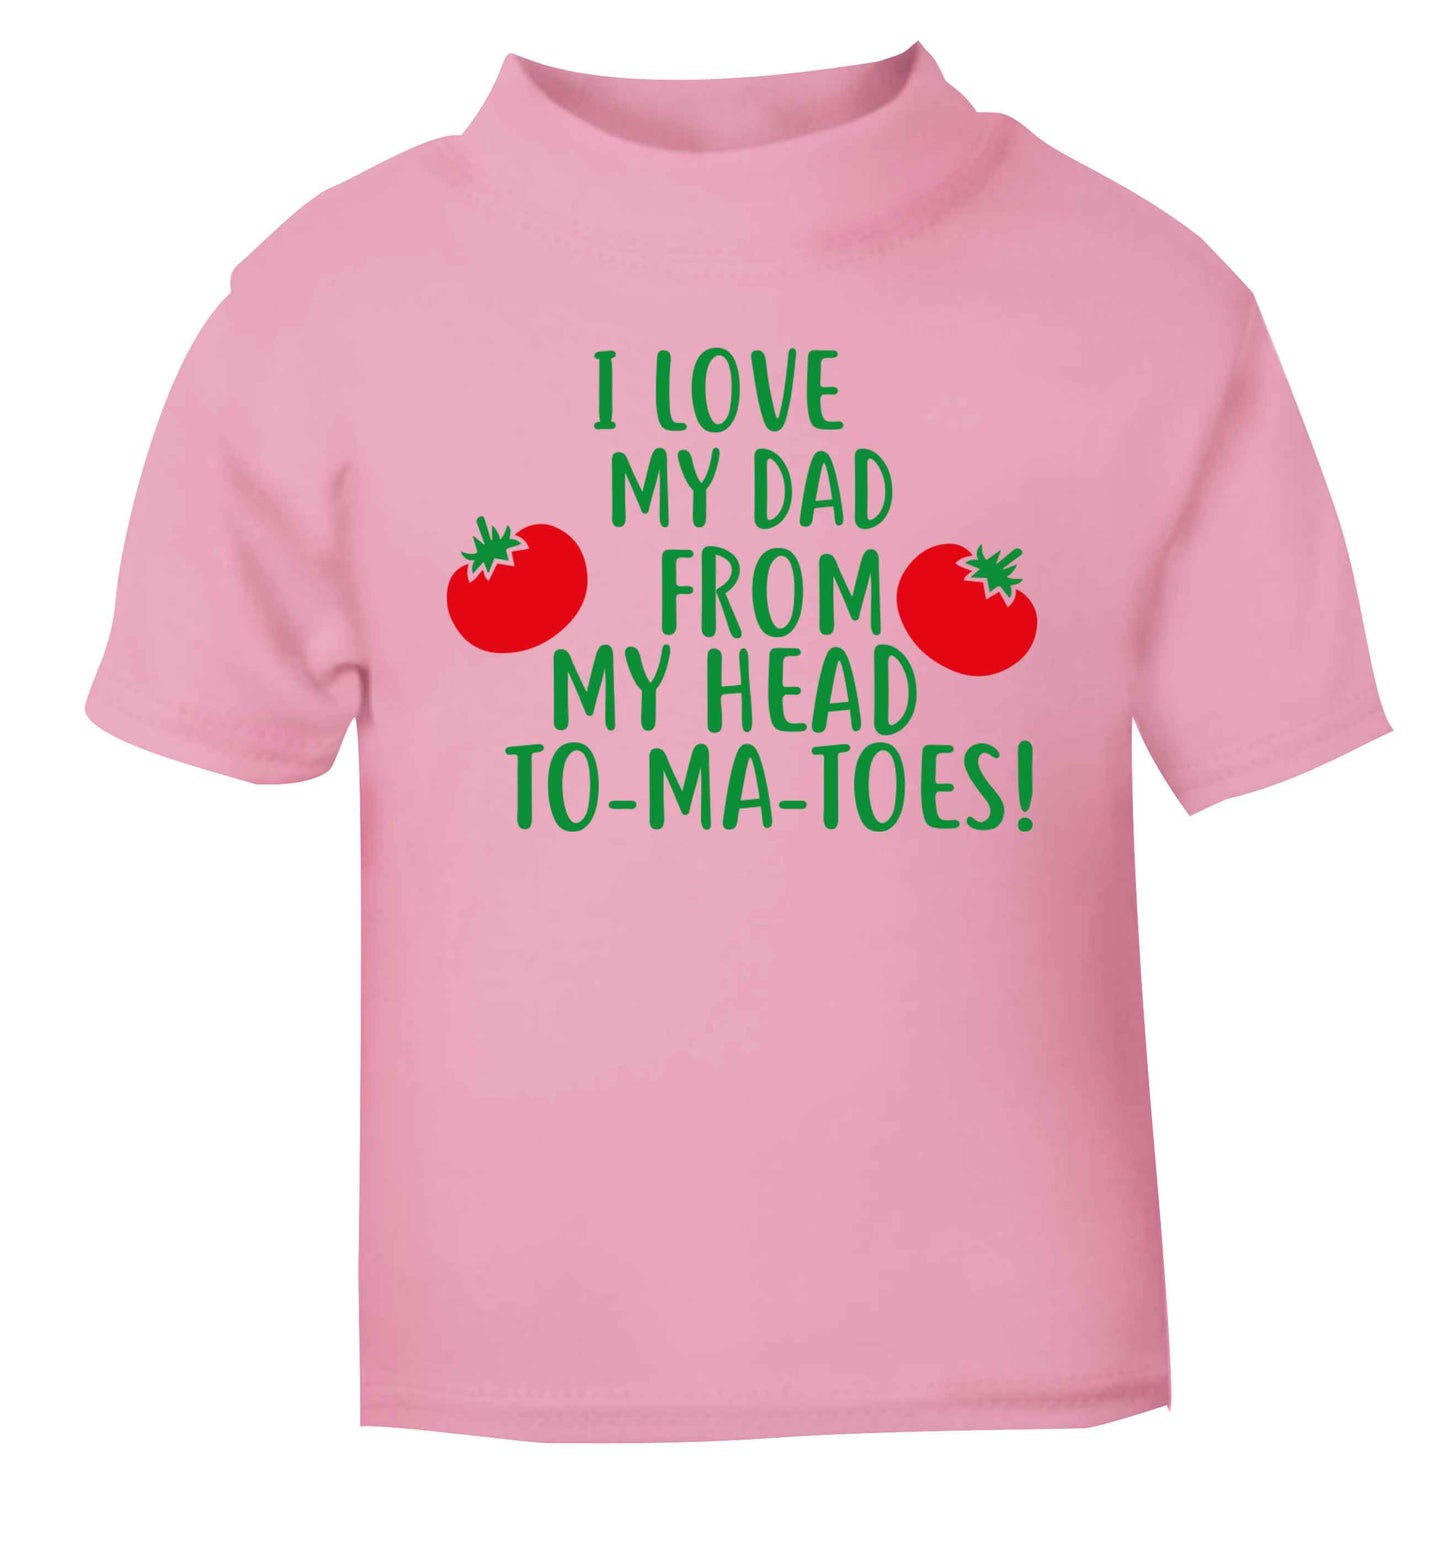 I love my dad from my head to-ma-toes light pink baby toddler Tshirt 2 Years